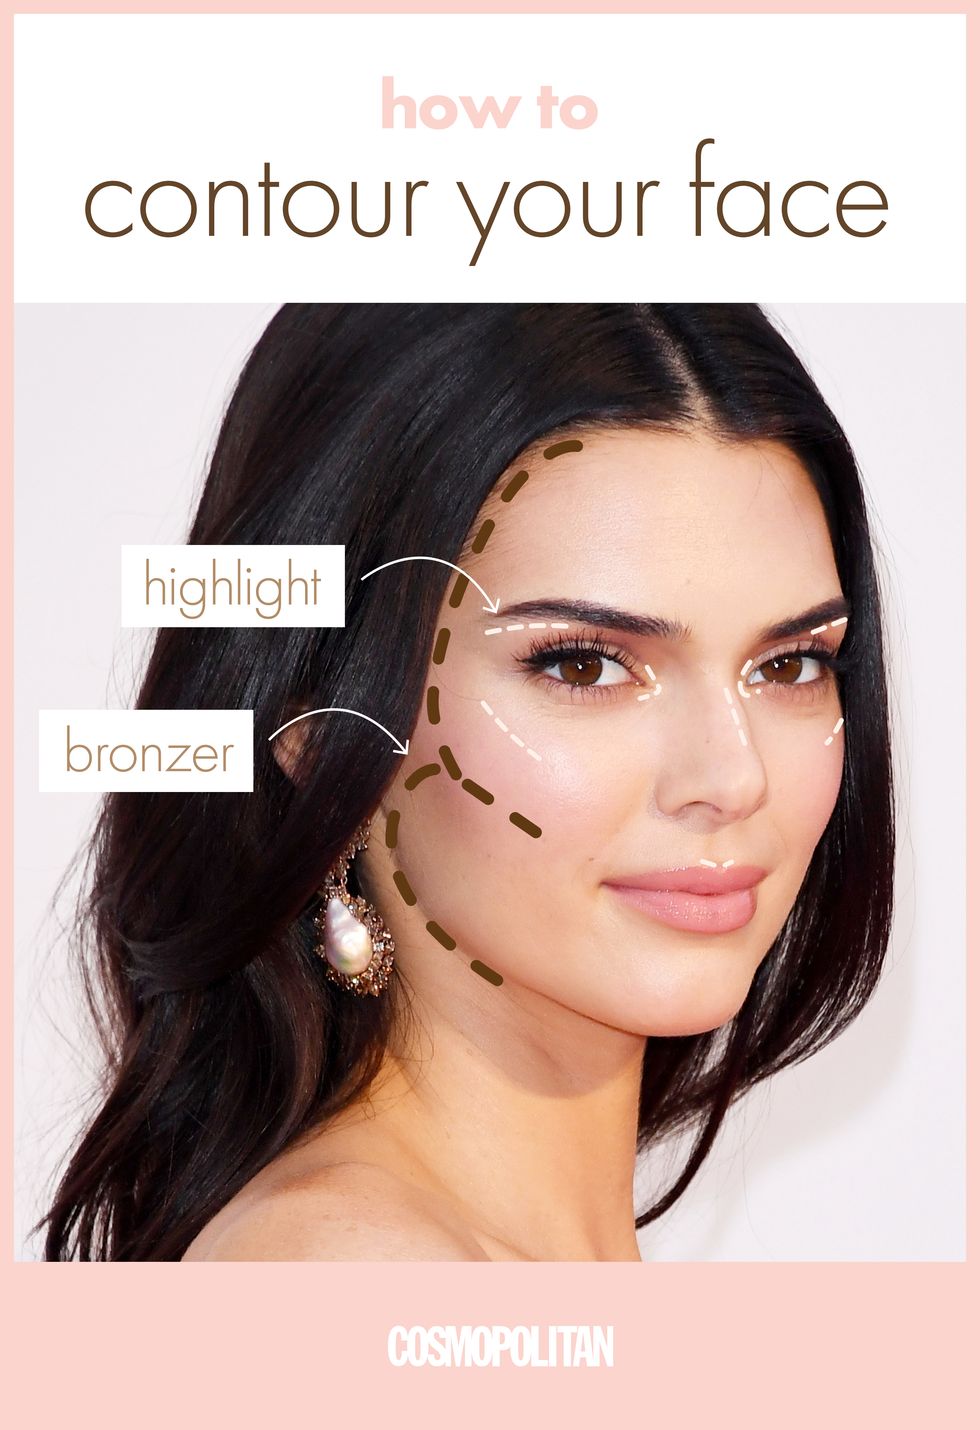 A Makeup Artist Tells Us How To Contour Your Face To Look Years